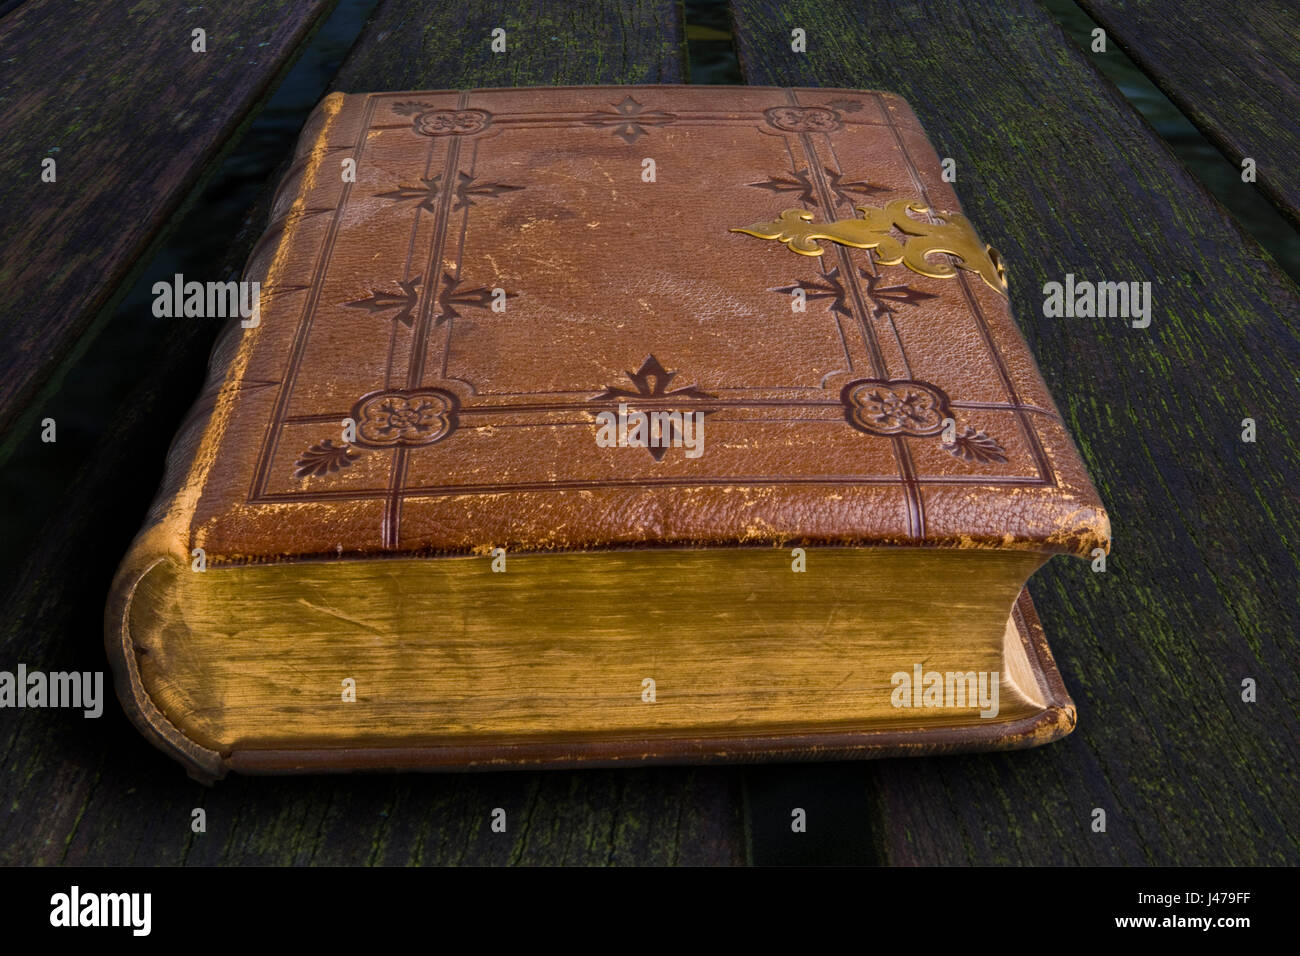 Antique tooled brown leather bound book with metal clasp on a wooden background Stock Photo